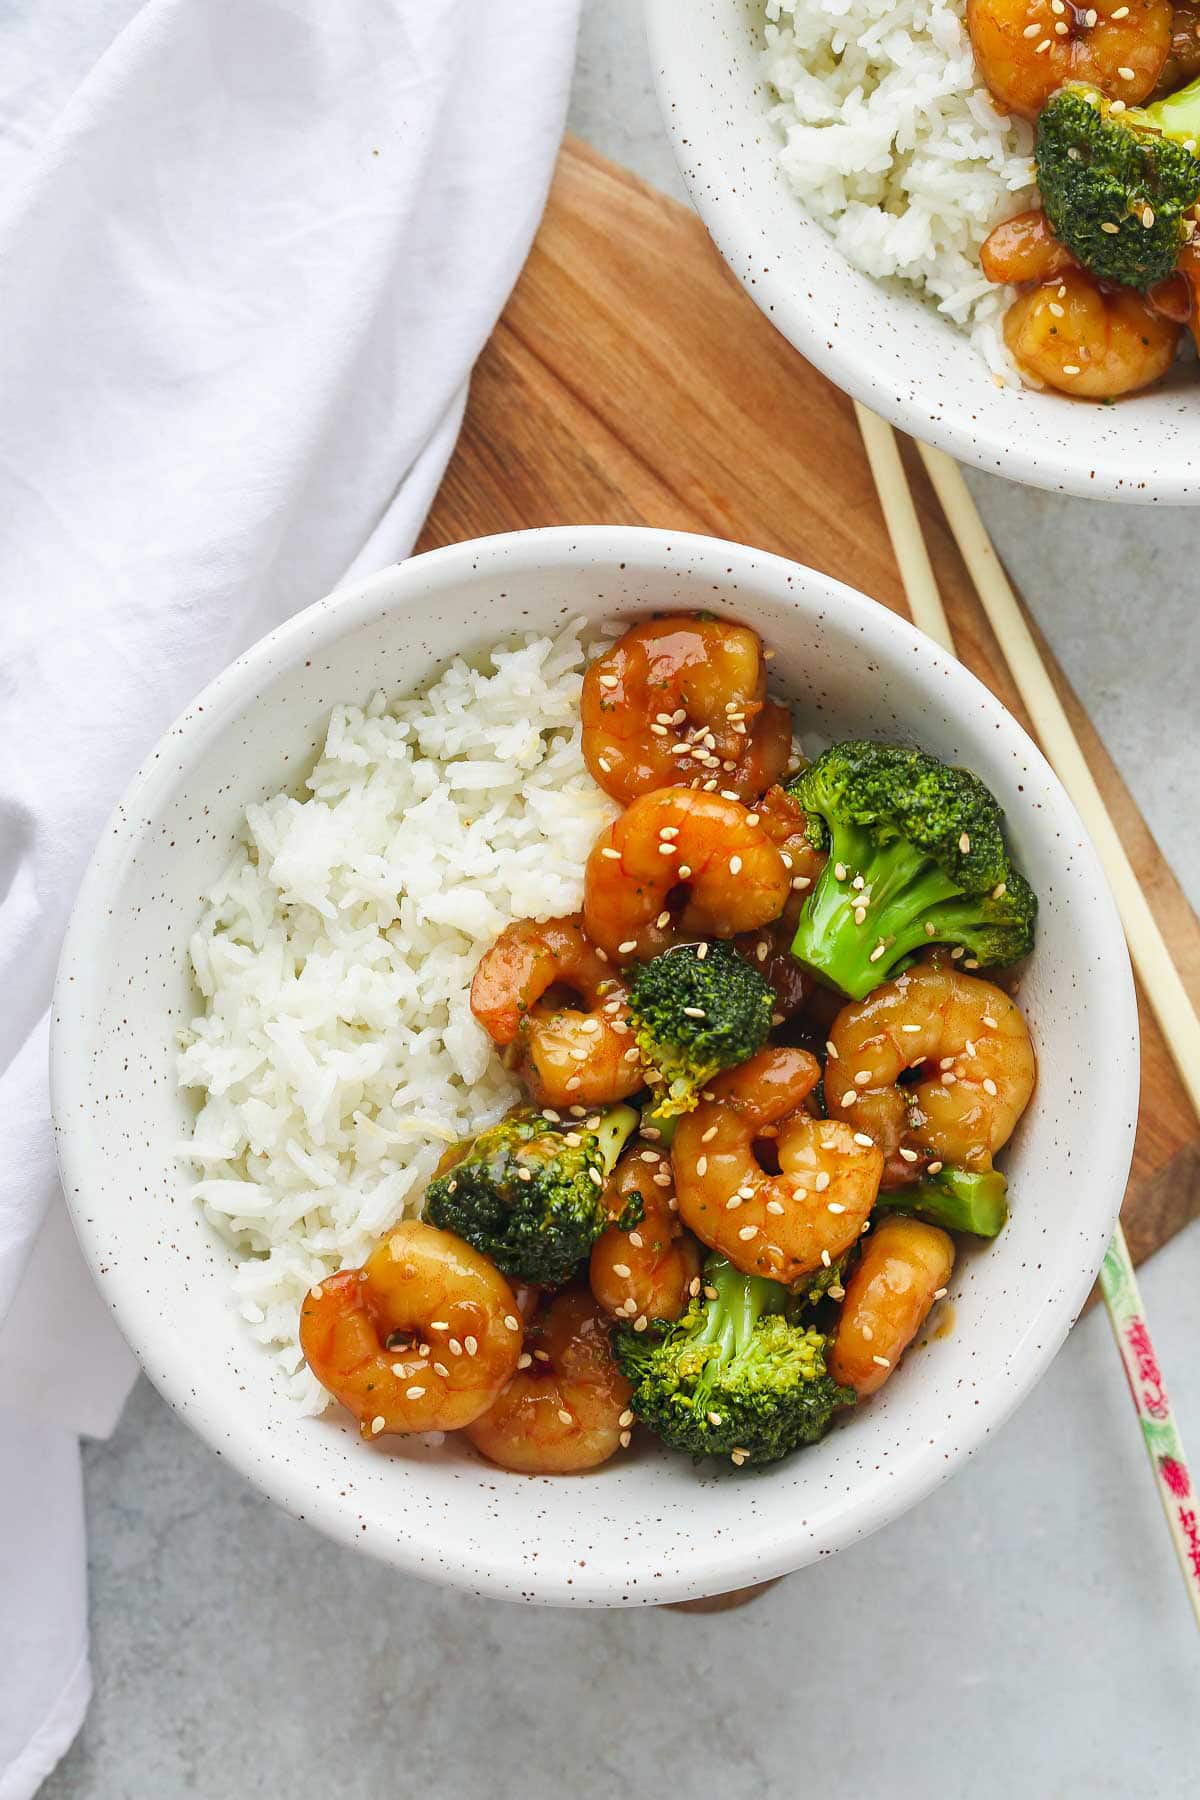 Shrimp and Broccoli stir fry in a white bowl with chop sticks